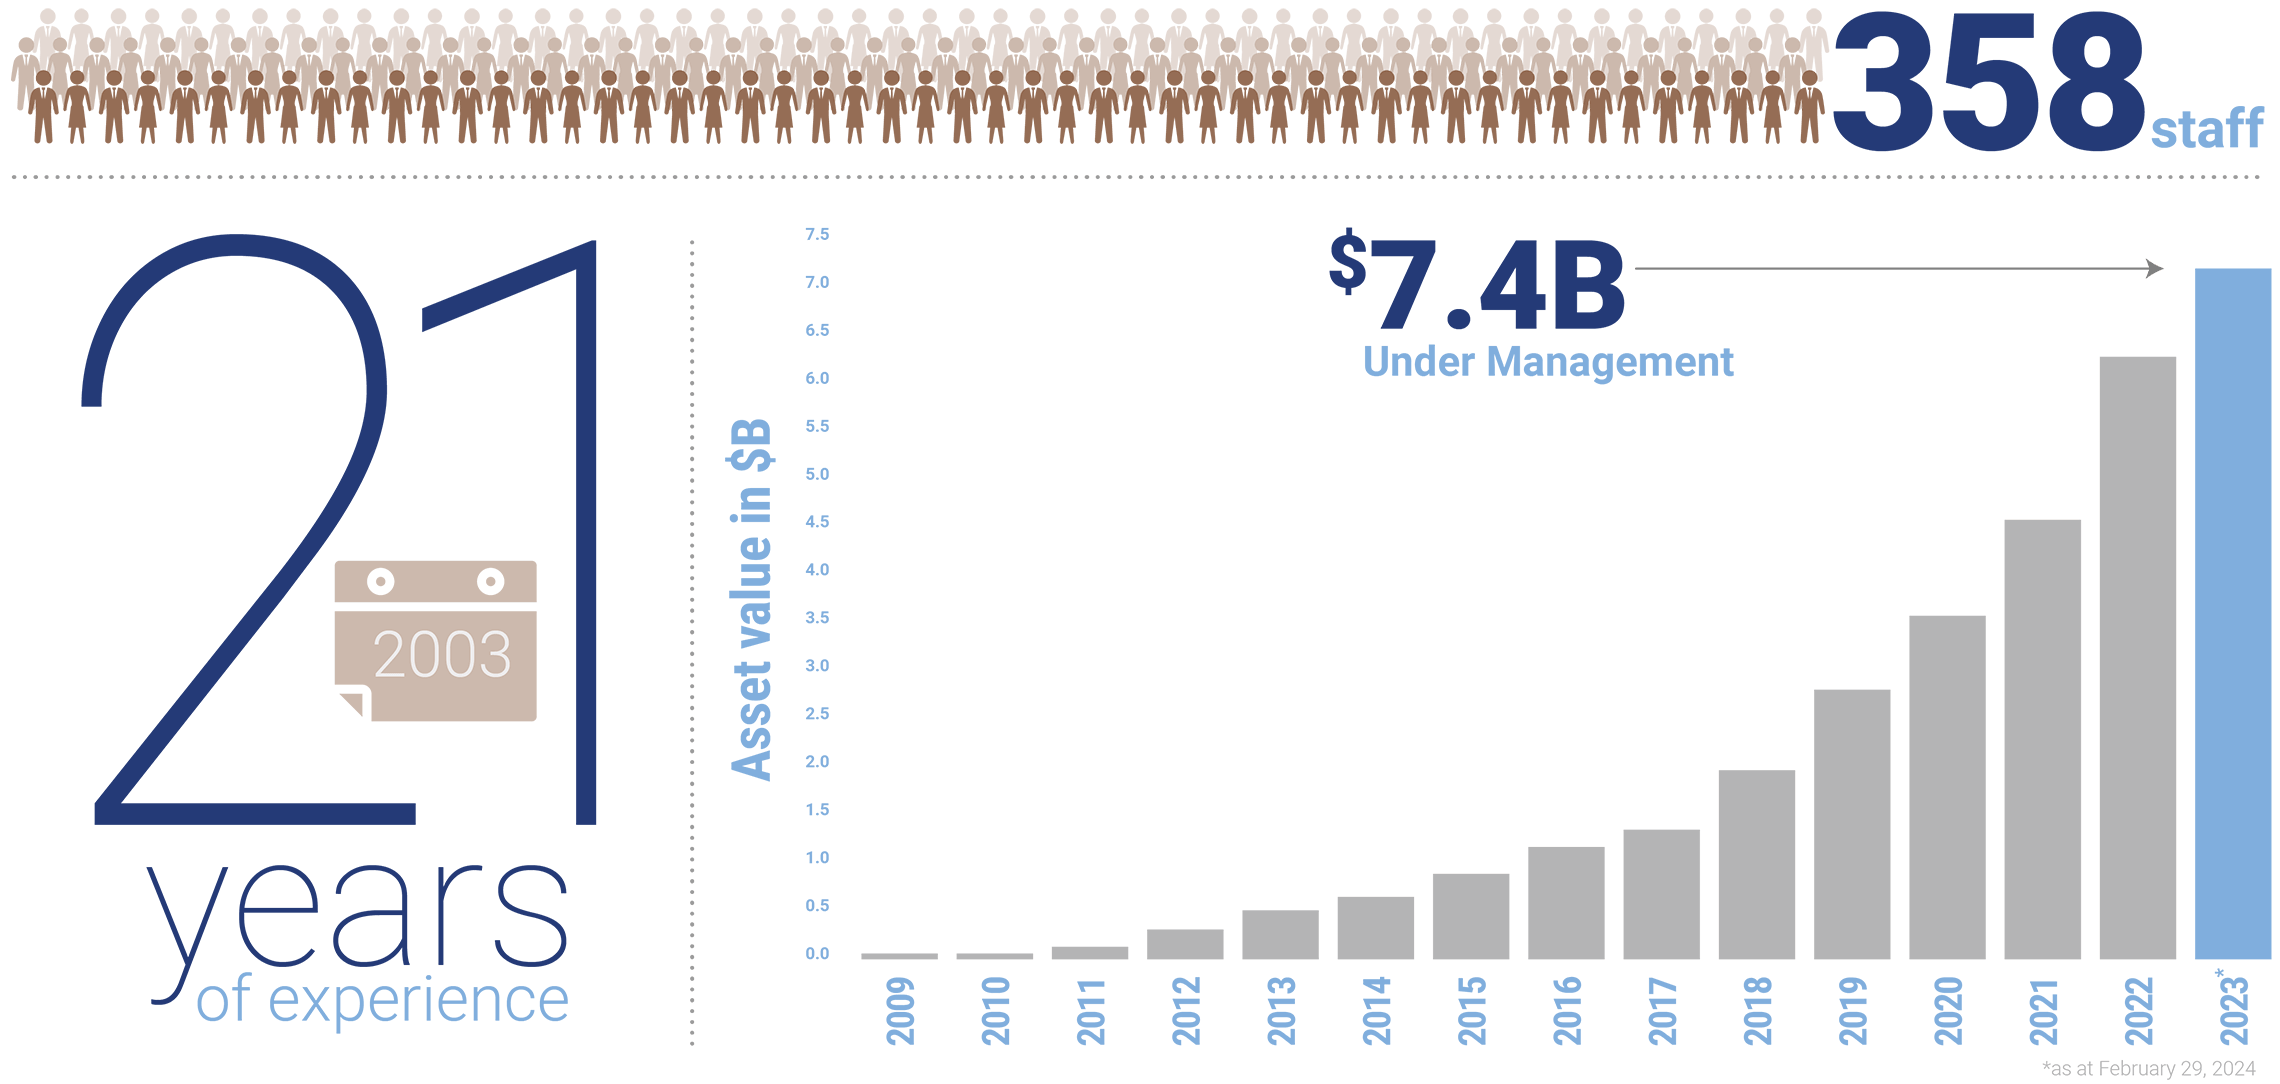 20 years of experience, 358 staff, over $7.4 billion under management as of February 29, 2024